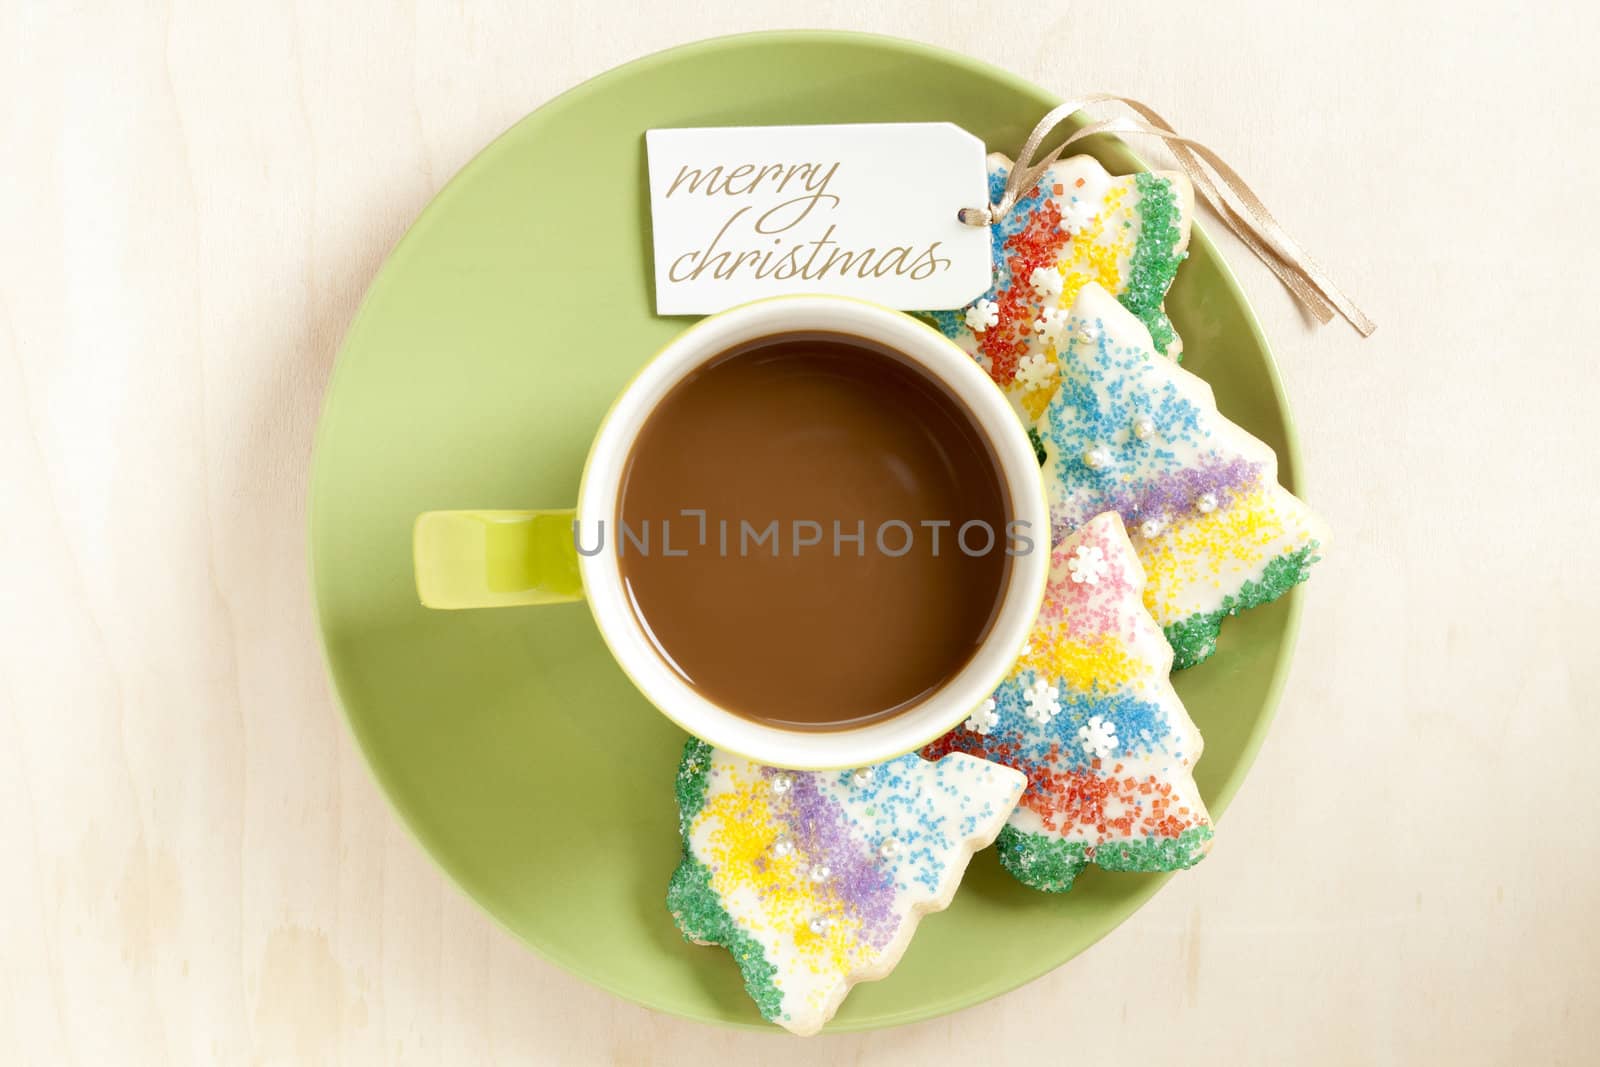 Image of hot chocolate in a cup in green saucer with christmas cookies isolated on a background